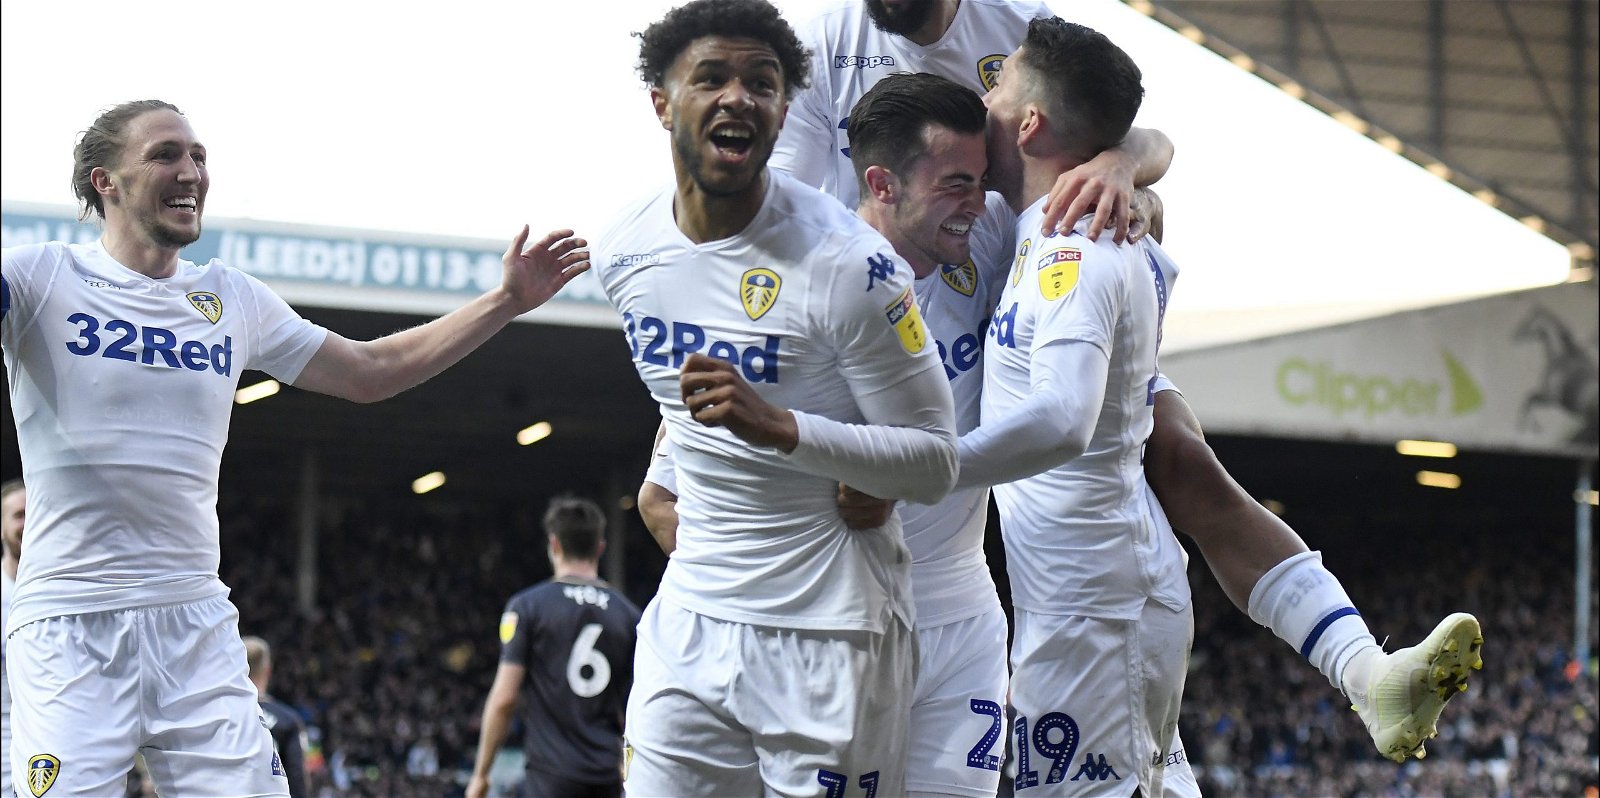 , Leeds United fans comment on Twitter &#8211; Team Ayling vs Team Roberts